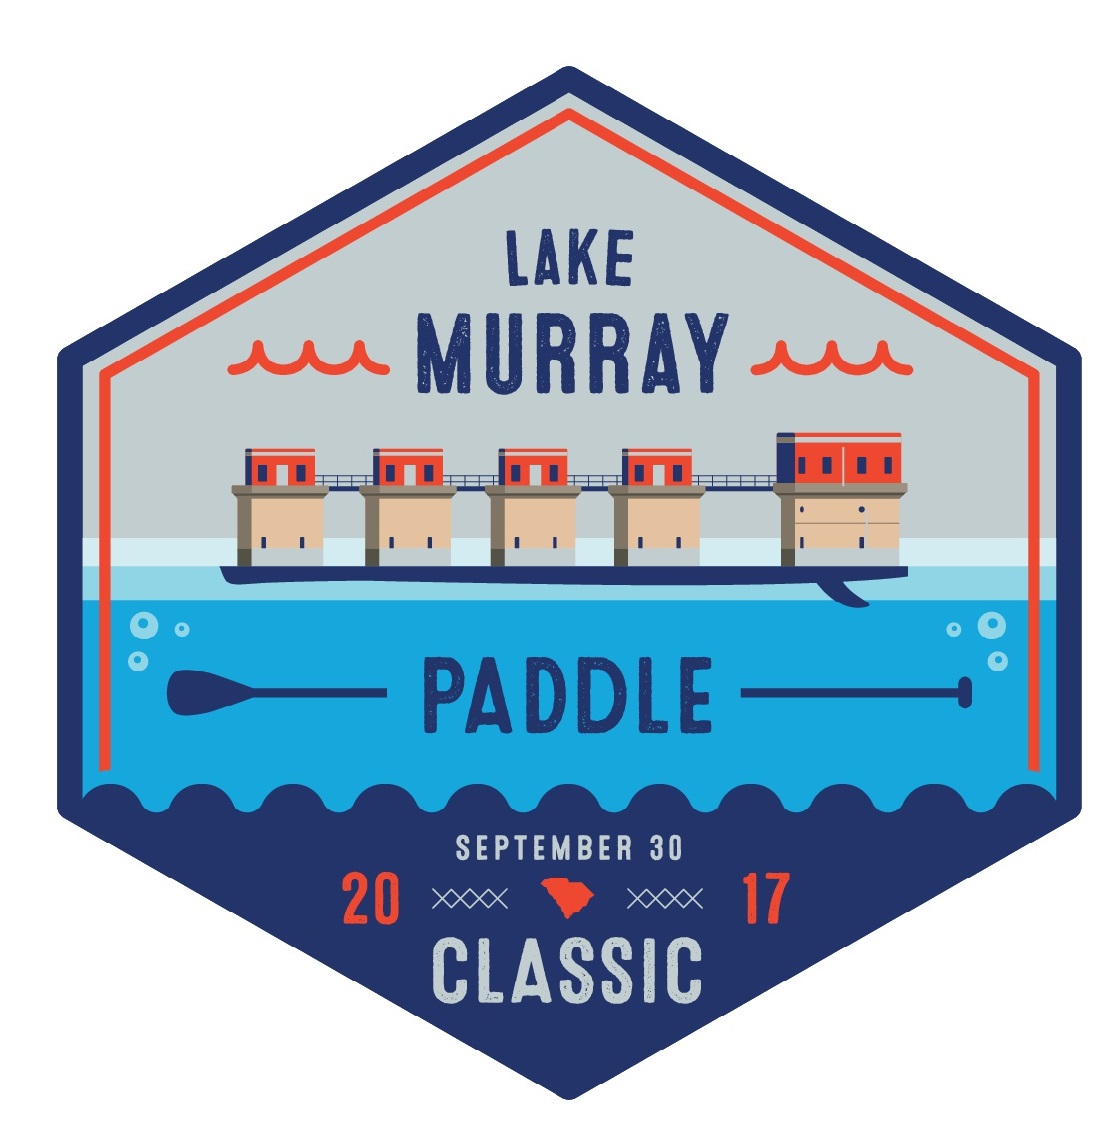 Win two race registrations for the 2017 Lake Murray Paddle Classic!